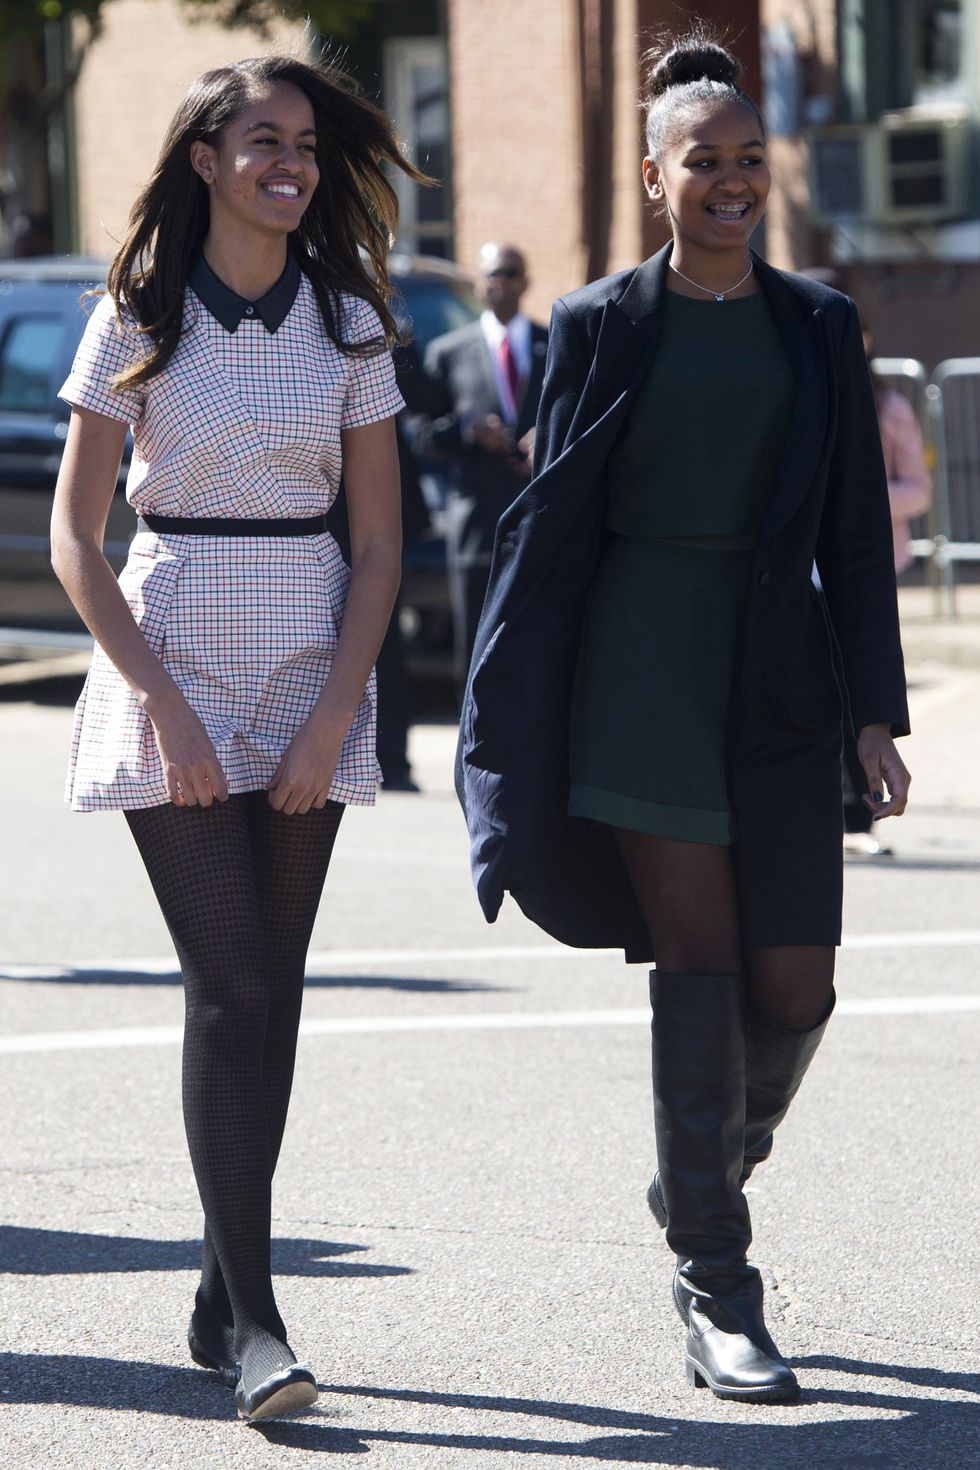 Malia and Sasha Obama attend an event marking the 50th Anniversary of the Selma to Montgomery civil rights marches at the Edmund Pettus Bridge in Selma, Alabama, on March 7, 2015. US President Barack Obama rallied a new generation of Americans to the spirit of the civil rights struggle, warning their march for freedom "is not yet finished." In a forceful speech in Selma, Alabama on the 50th anniversary of the brutal repression of a peaceful protest, America's first black president denounced new attempts to restrict voting rights. AFP PHOTO/ SAUL LOEB        (Photo credit should read SAUL LOEB/AFP/Getty Images)